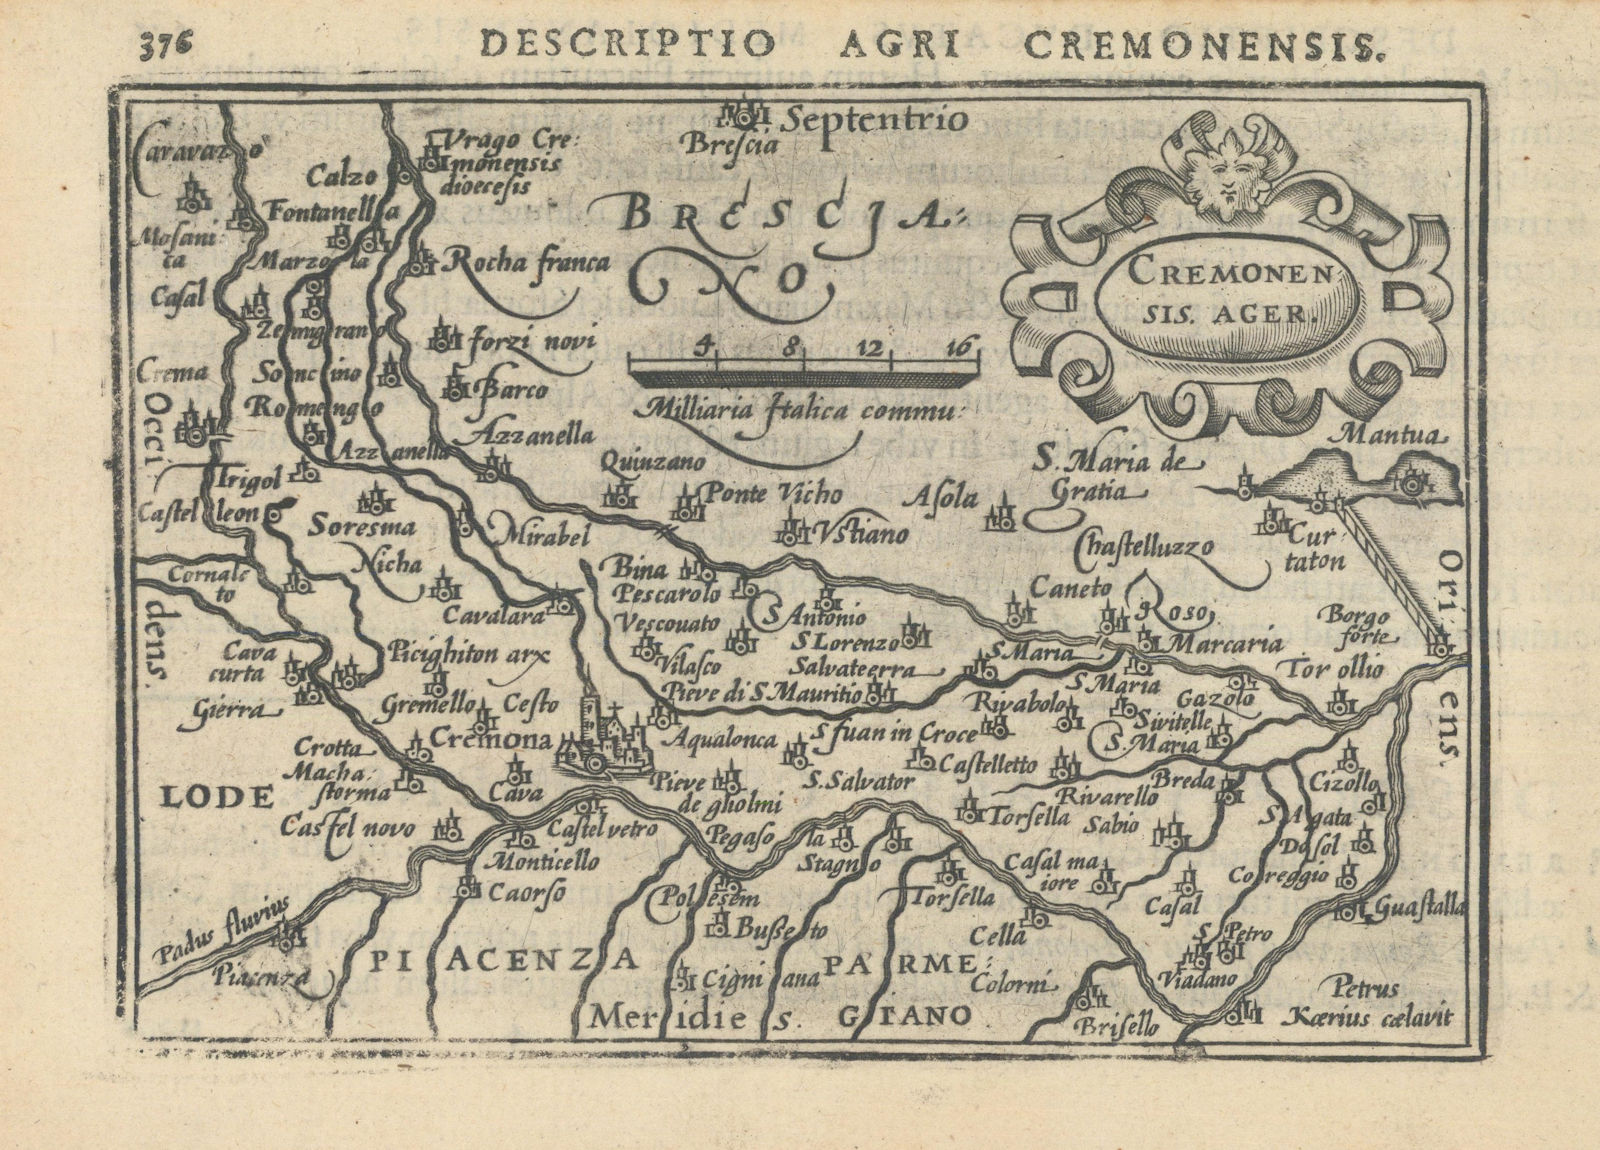 Cremonensis Ager. by Bertius / Langenes. Cremona region, Lombardy 1603 old map